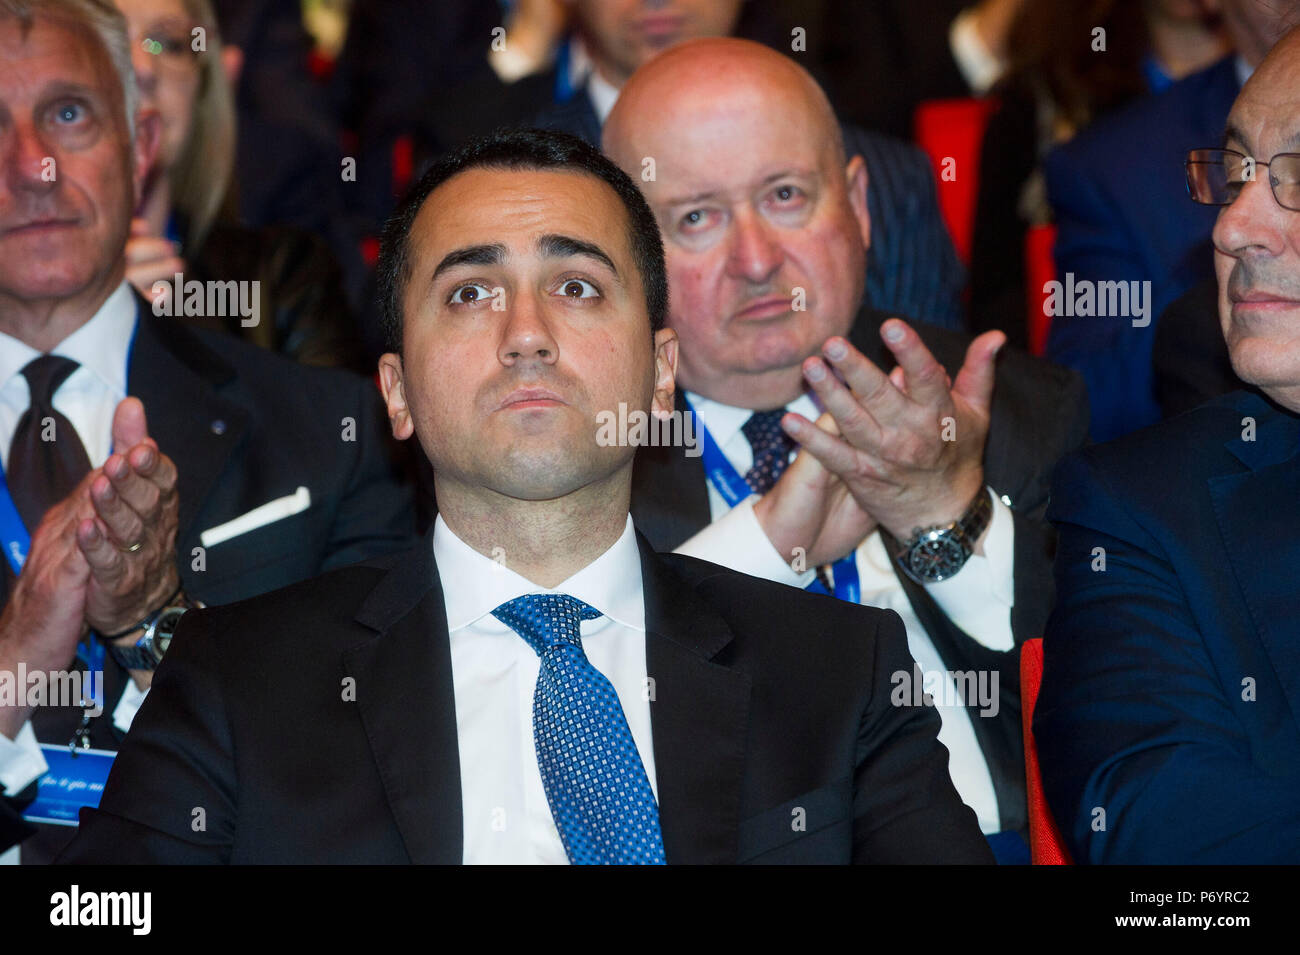 Italy, Rome, Luigi Di Maio, Leader of Five Star Movement (M5S), Vice-President of the Council of Ministers of the Italian Republic from 2018. Stock Photo